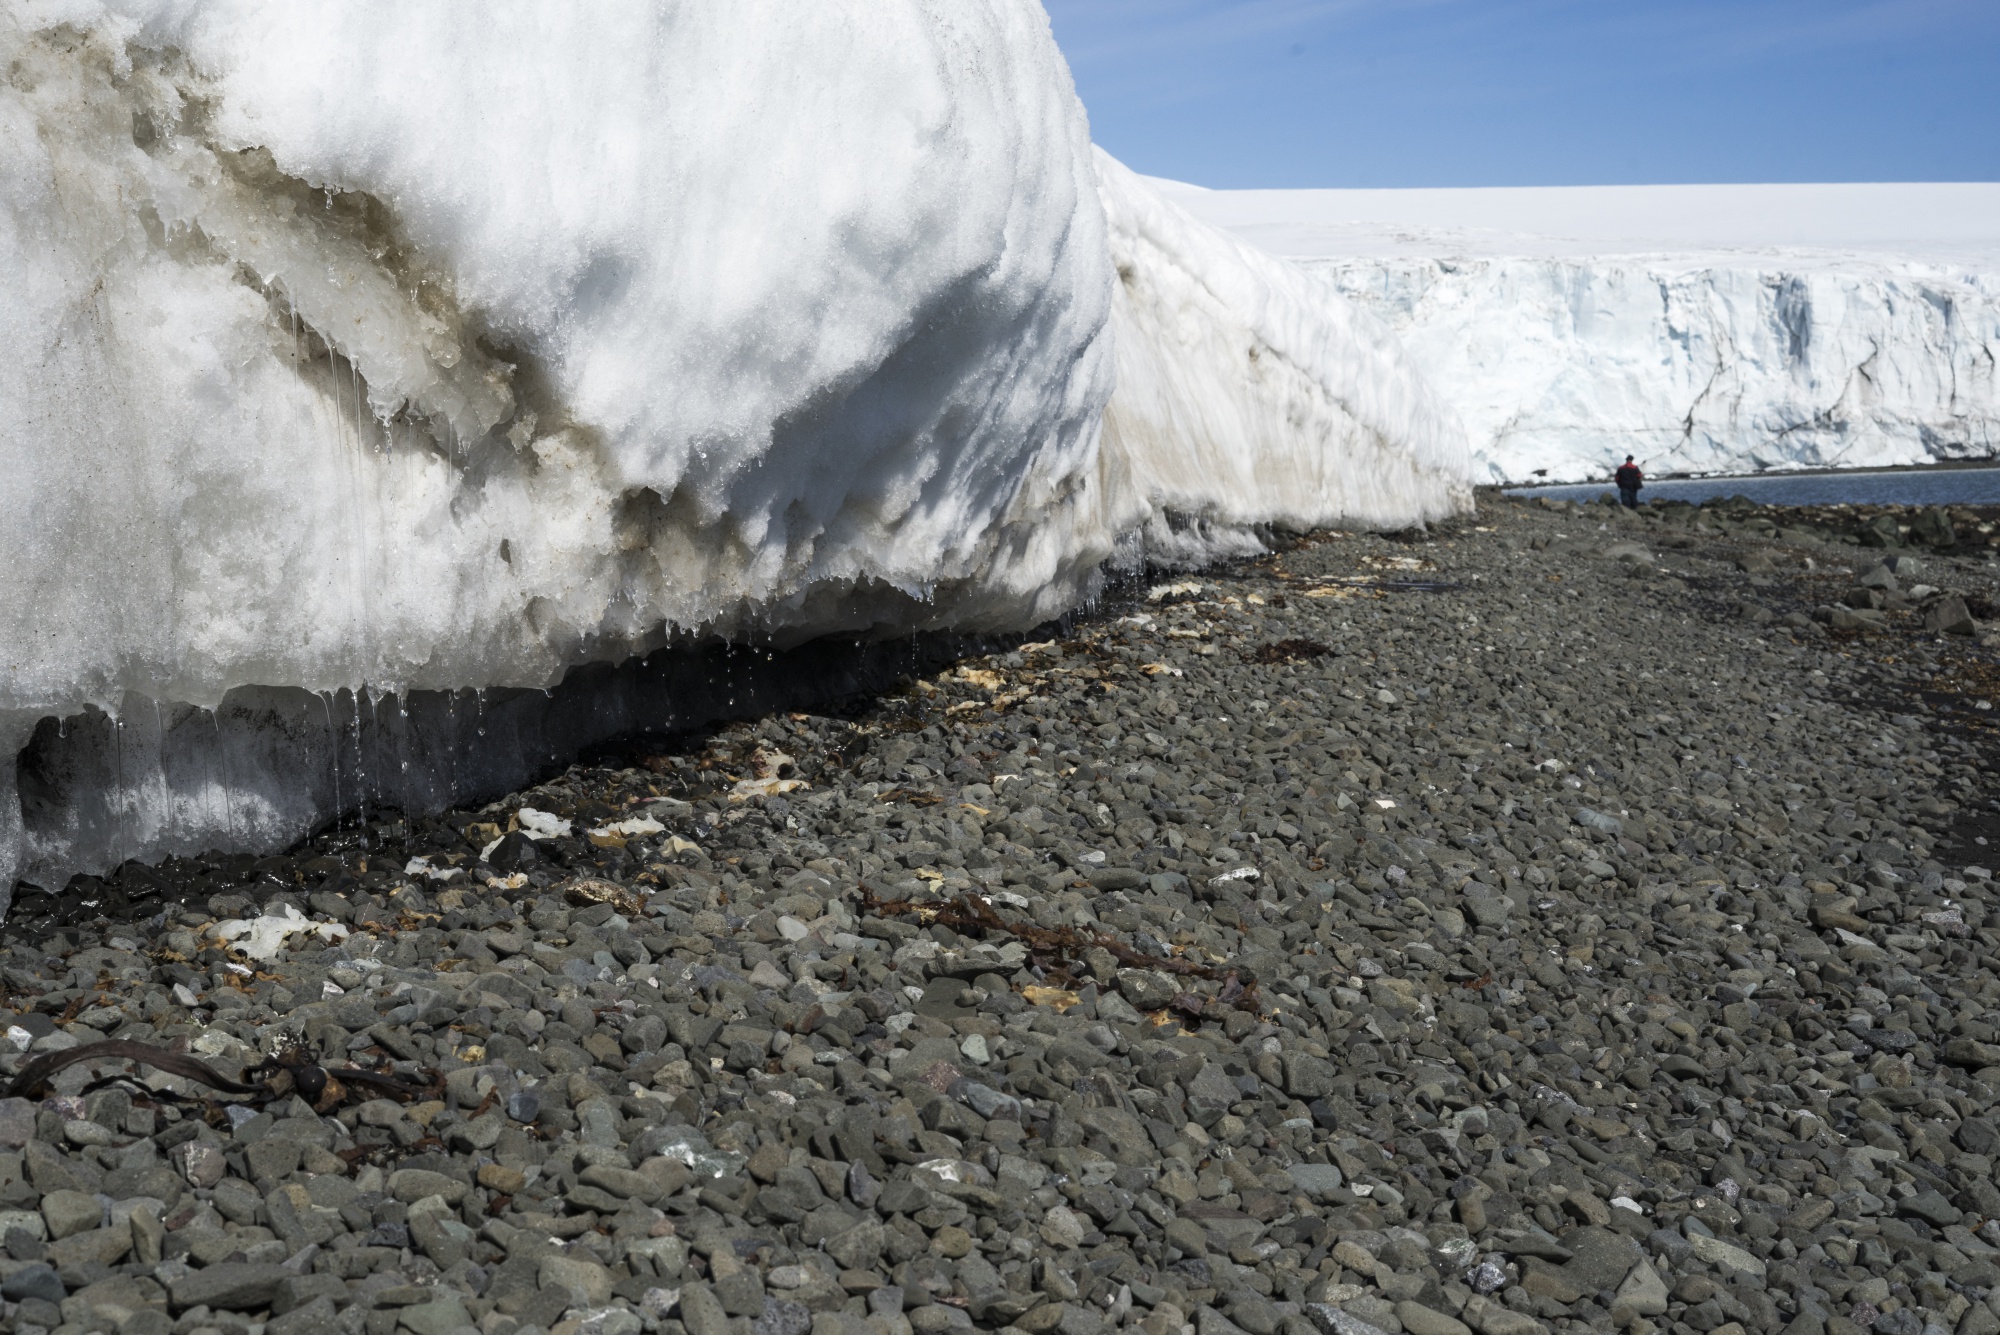 The Quito Glacier is seen melting near Ecuador's Pedro Vicente Maldonado Research Station on Greenwich Island, Antarctica, on Friday, Feb. 1, 2019. Members of the 23rd Ecuadorian Antarctic Expedition arrived at the White Continent earlier this year to conduct research, develop scientific exploration and to document the environmental impacts on glaciers, flora and fauna in the region.